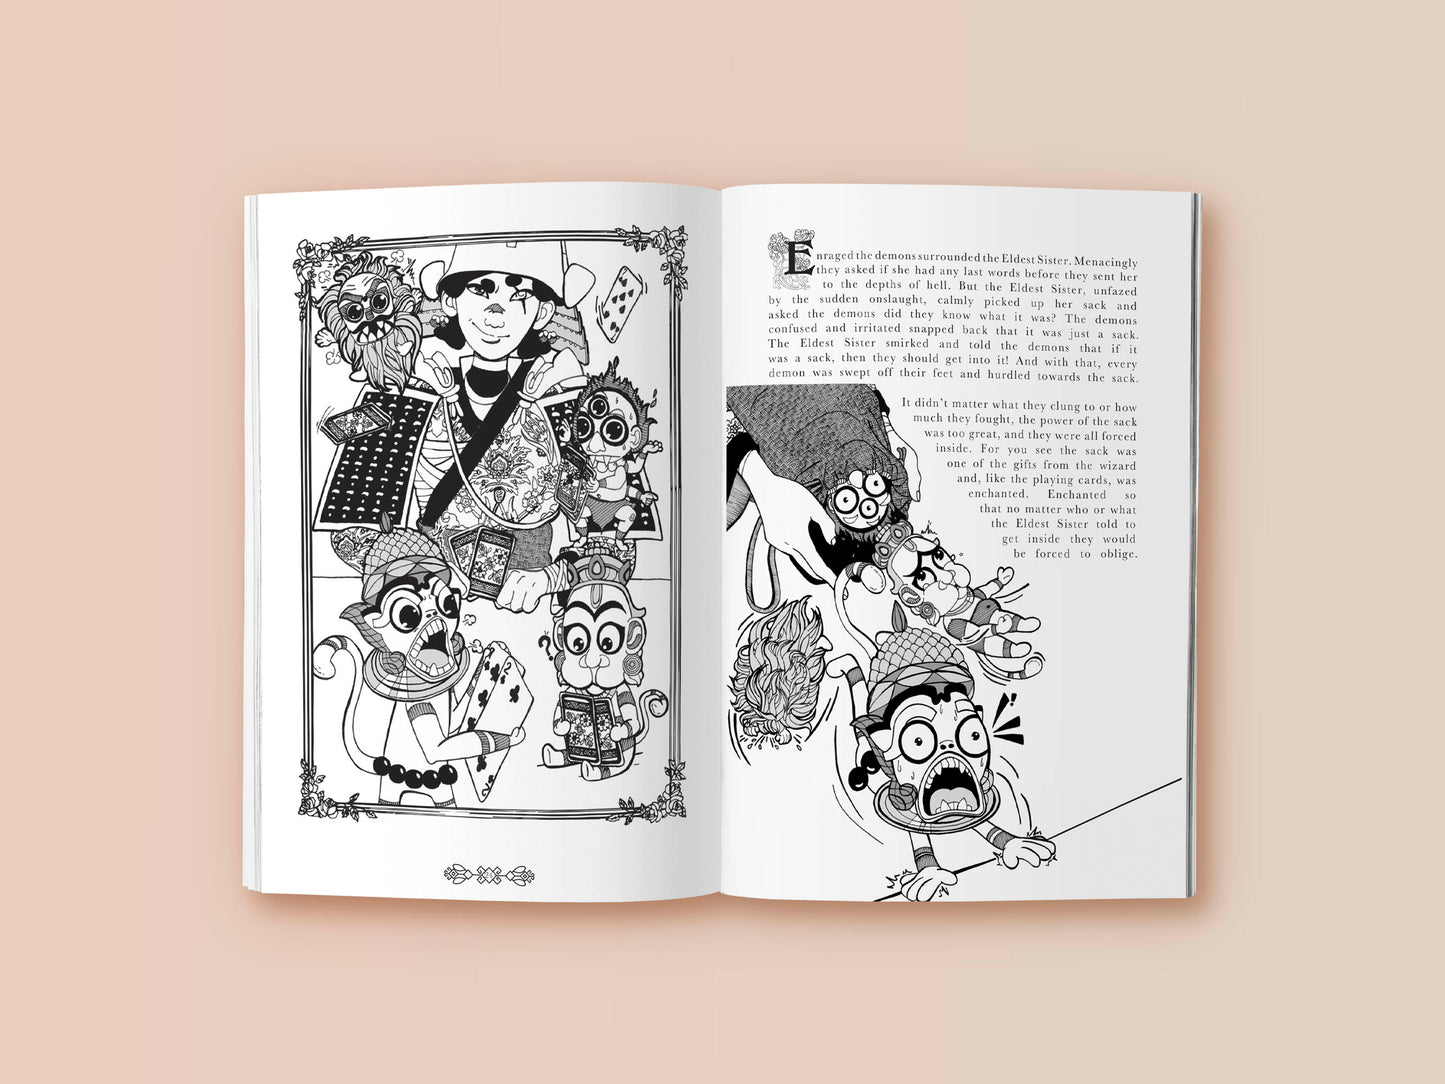 Interior pages of book showing text and a black and white cartoon drawing of a female samurai playing a card game with Indian yakshas and demons